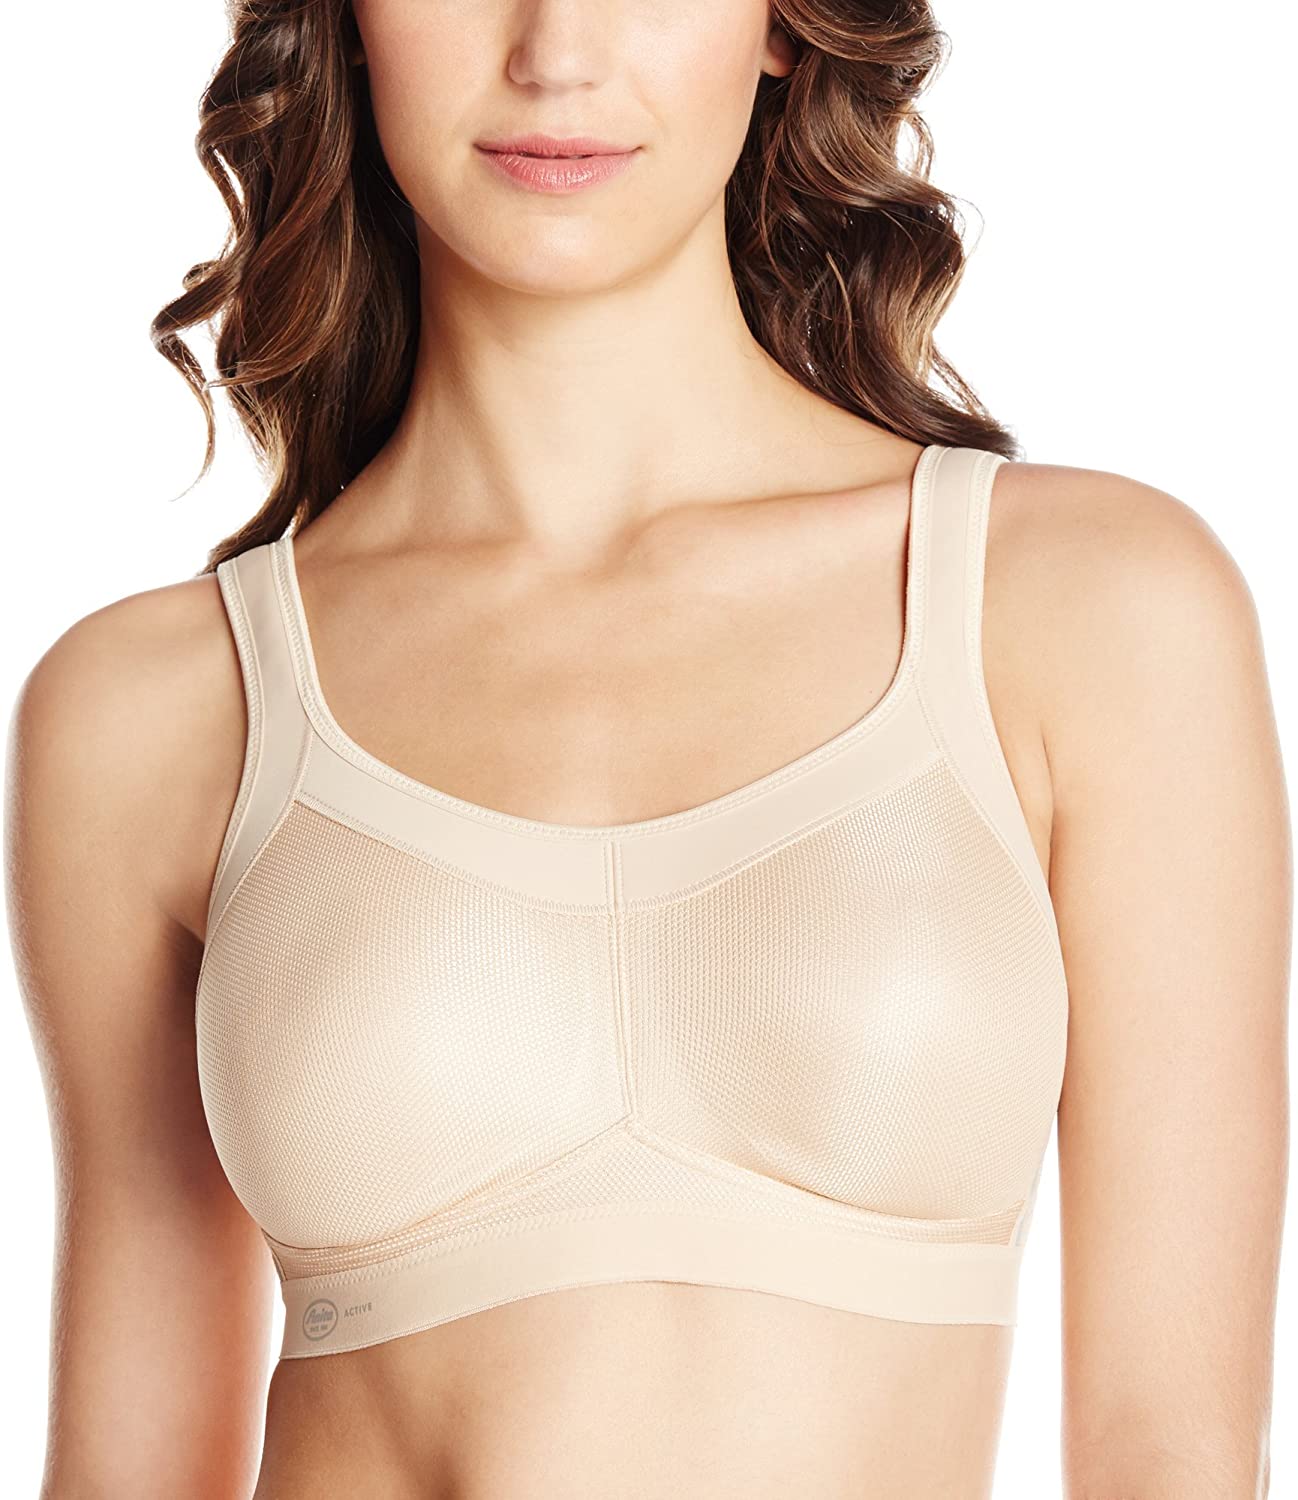 Small Size Figure Types in 34F Bra Size Desert by Anita Maternity